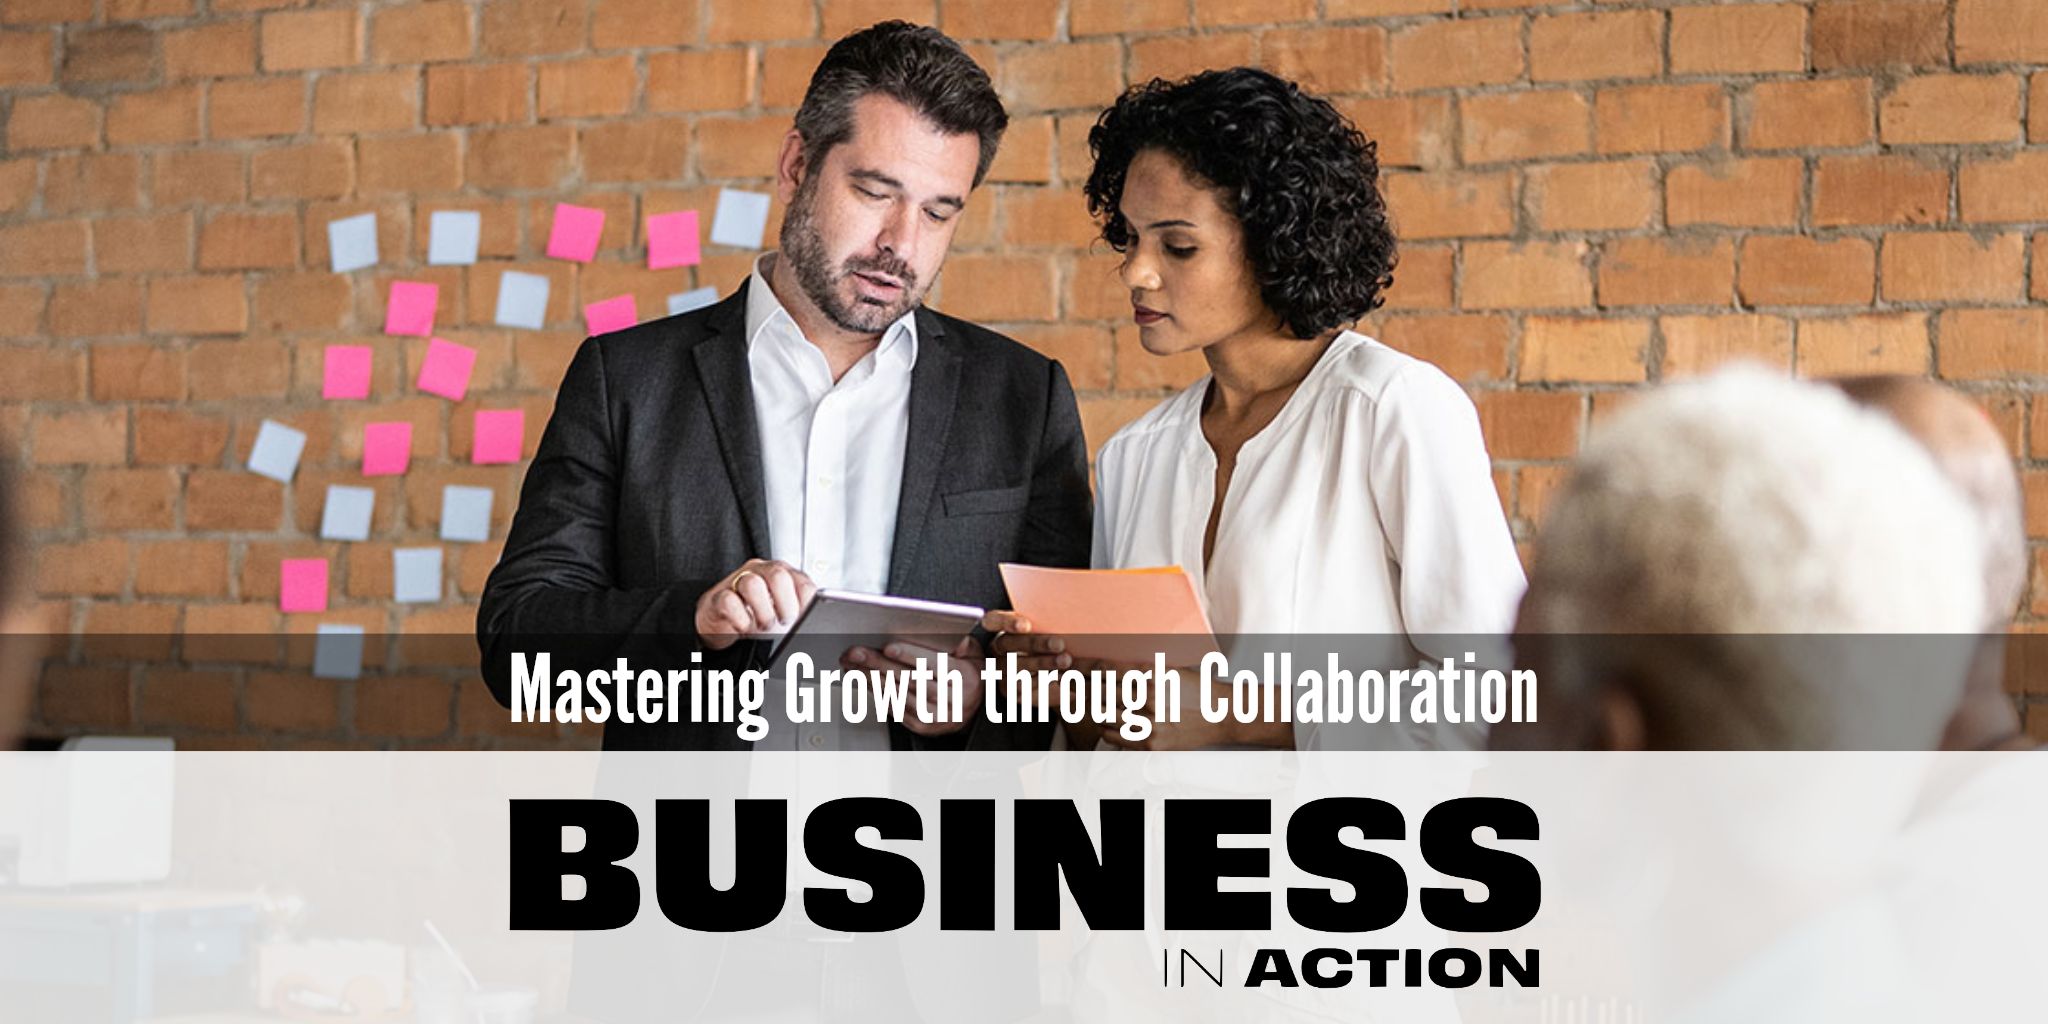 Business in Action: Mastering Growth through Collaboration